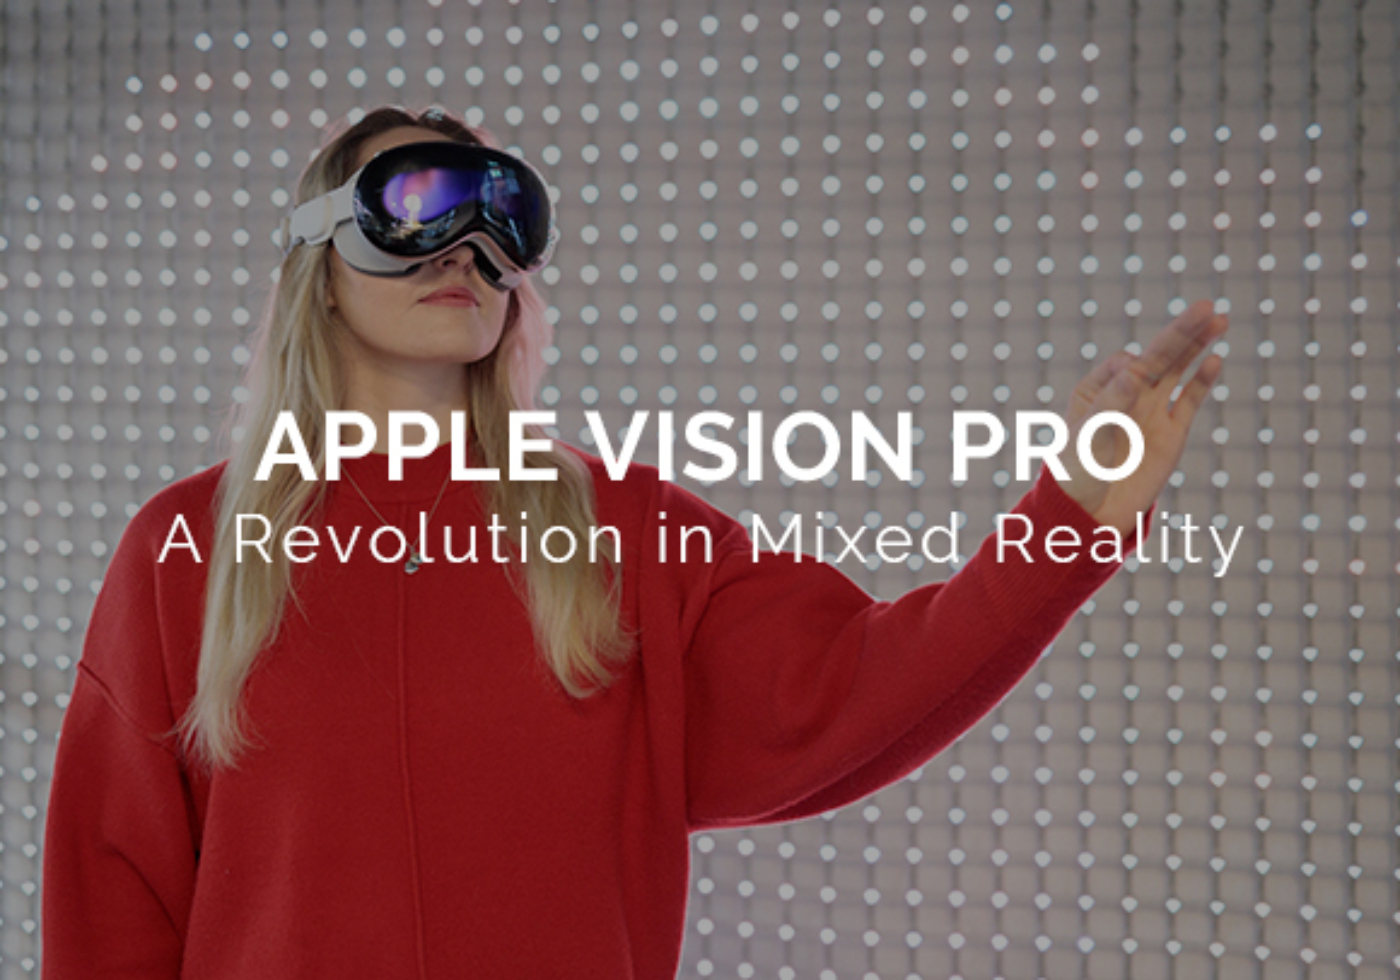 Apple vision pro mixed reality scientific experiences